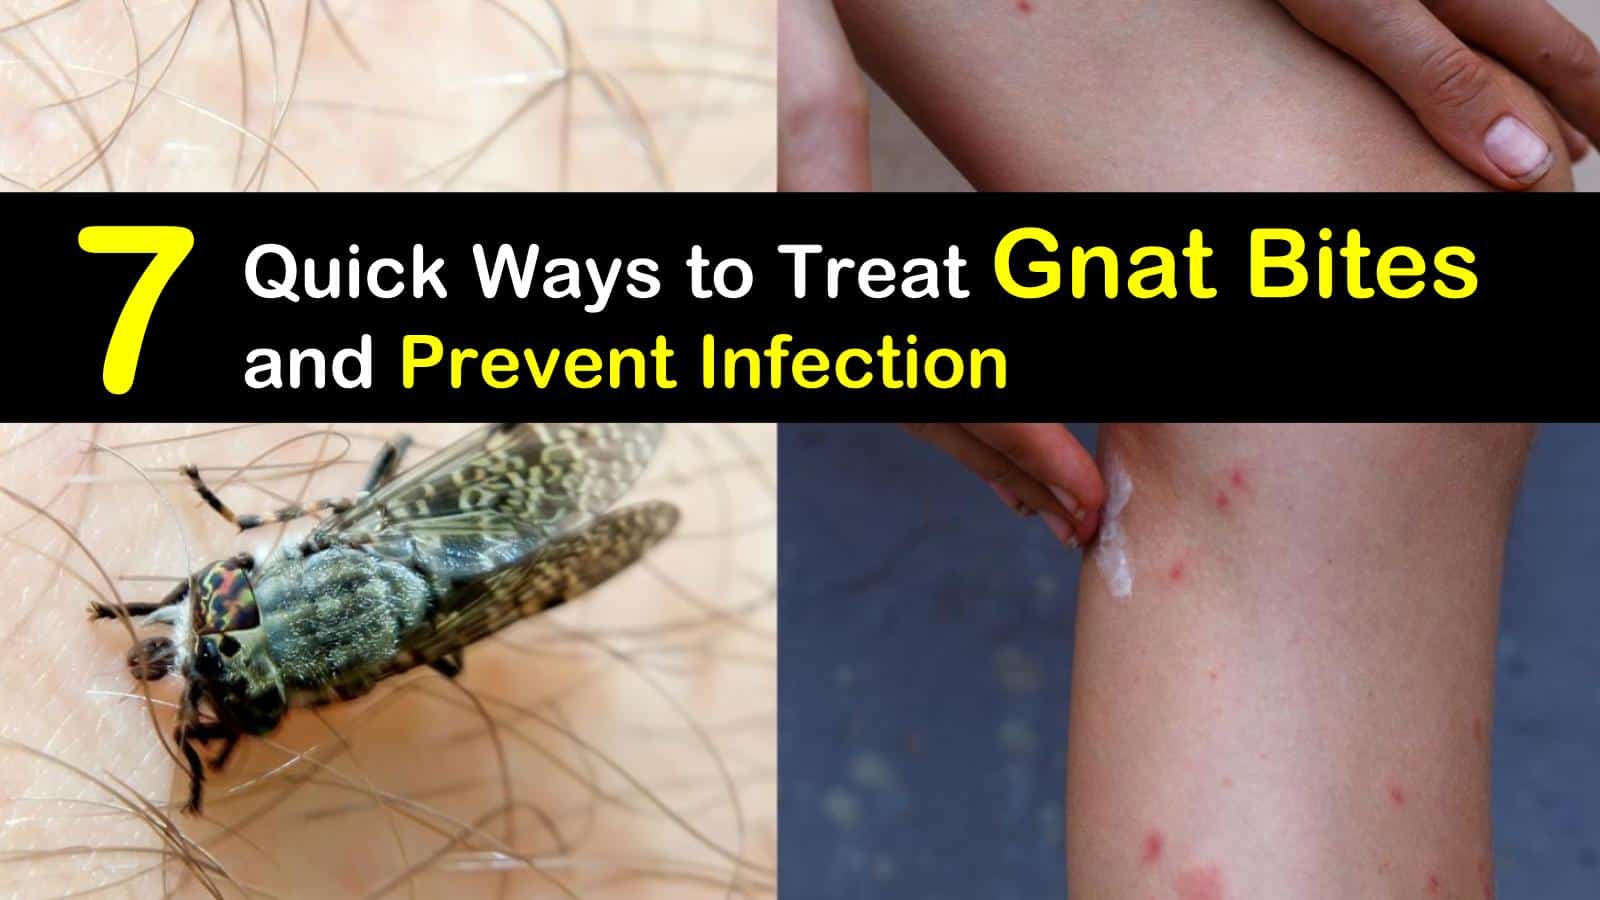 7 Quick Ways to Treat Gnat Bites and Prevent Infection titileimg1